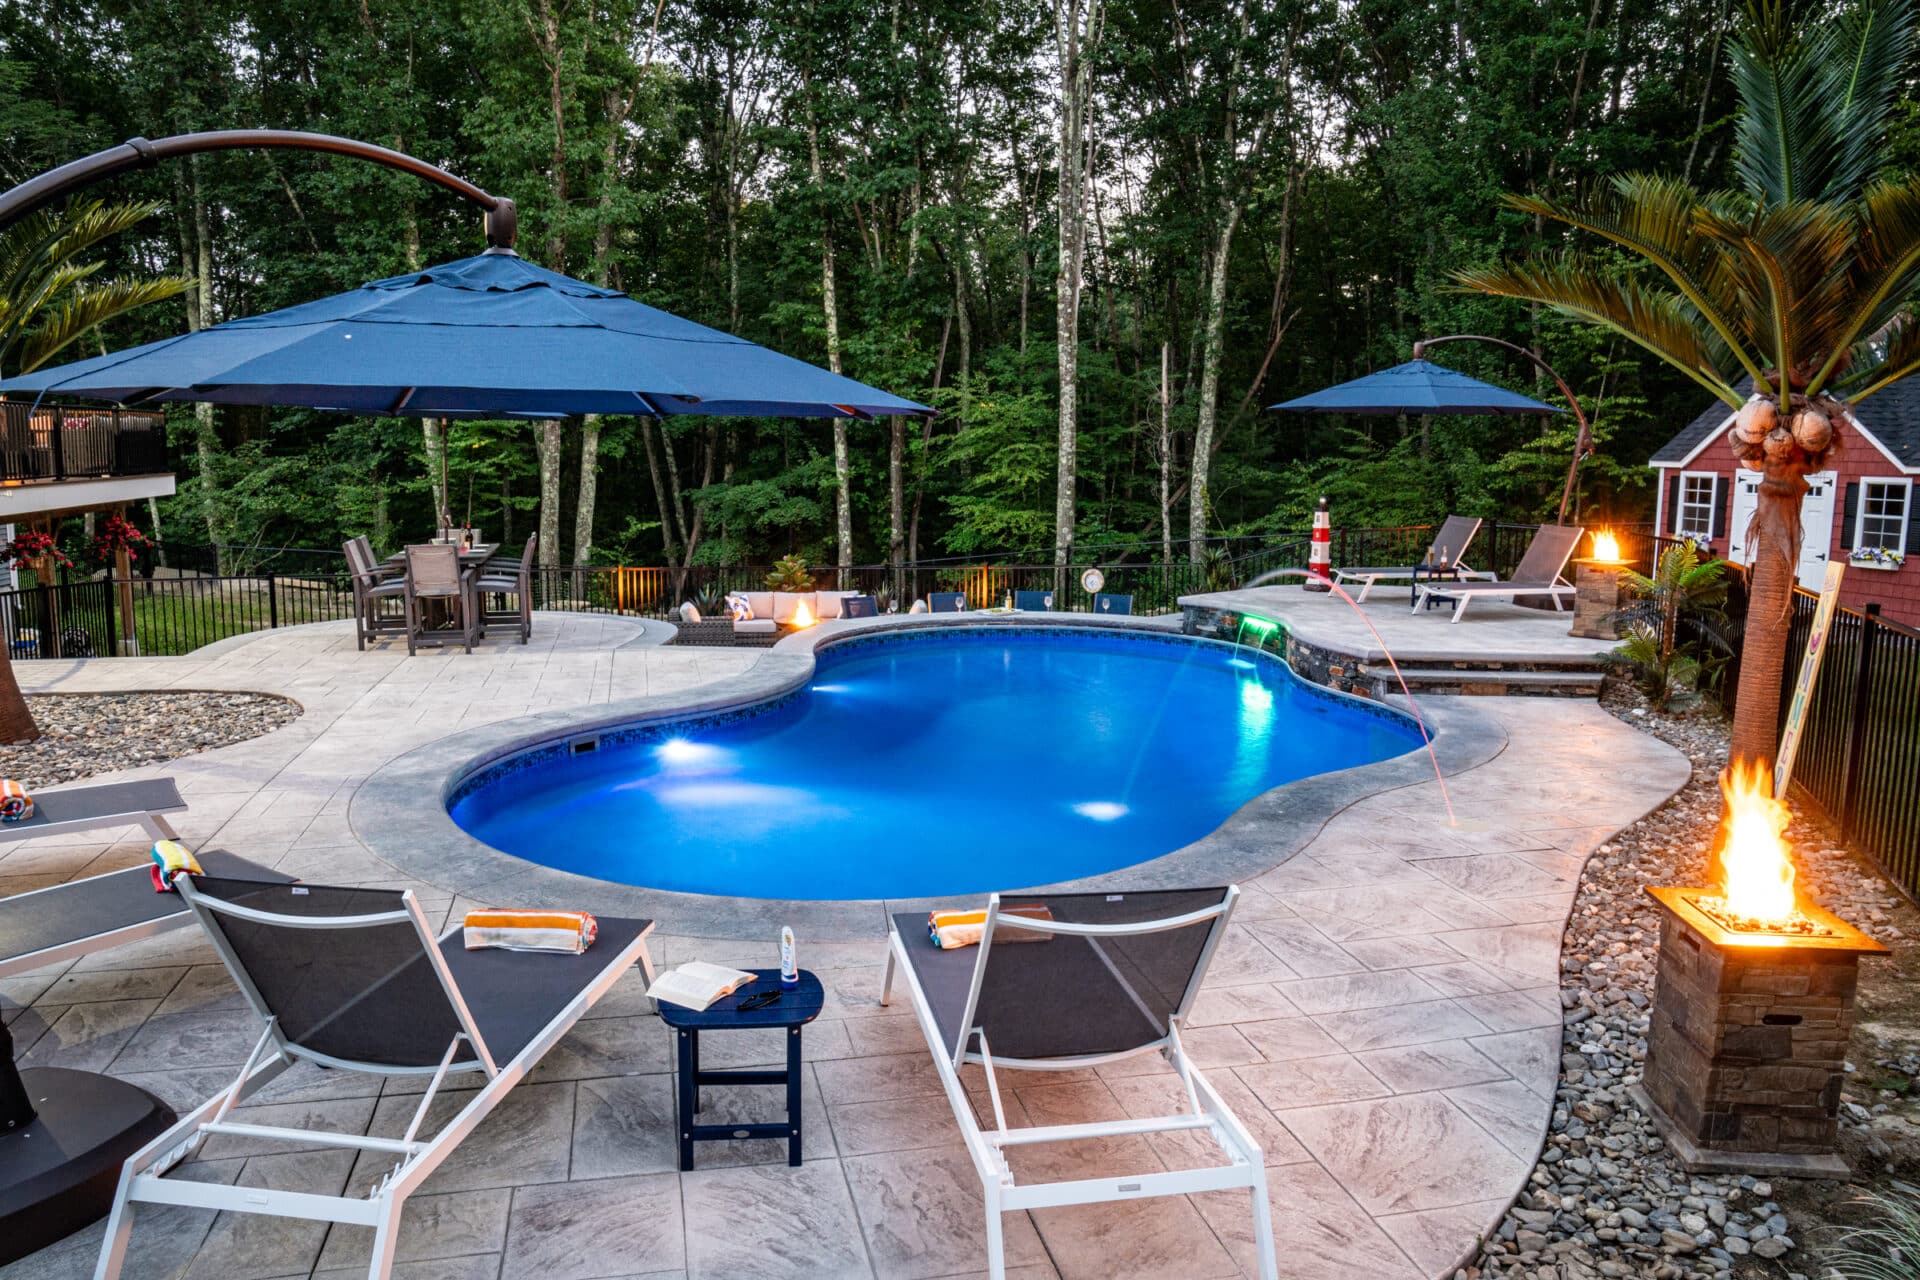 Northbridge, MA hardscape with a stamped concrete pool deck, poolside bar, sundeck, and water feature built by Dex by Terra.